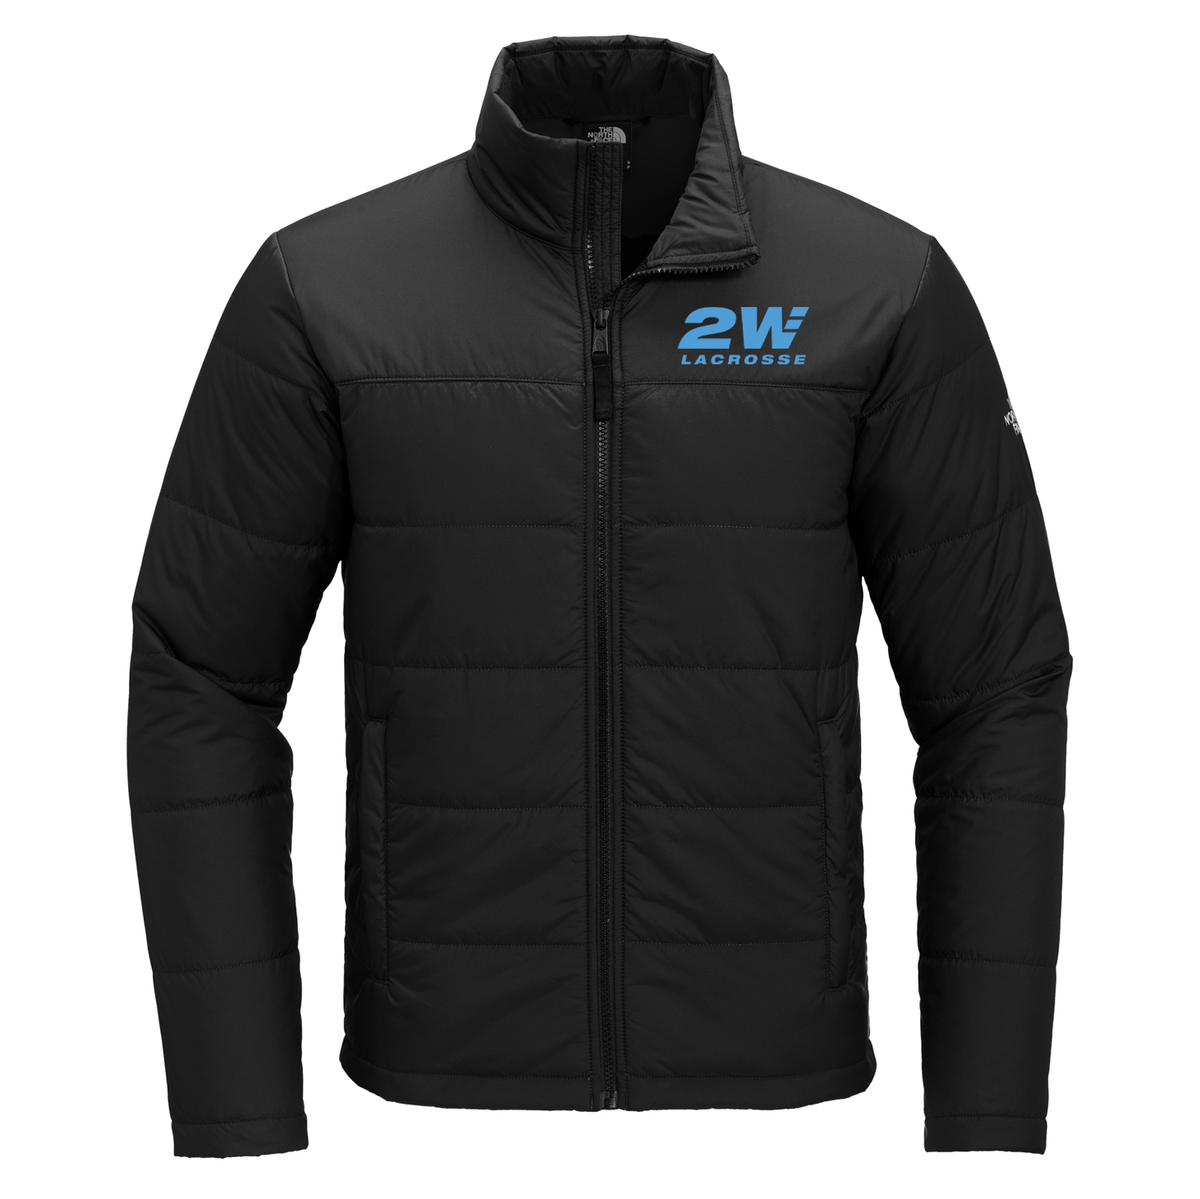 2Way Lacrosse The North Face® Everyday Insulated Jacket